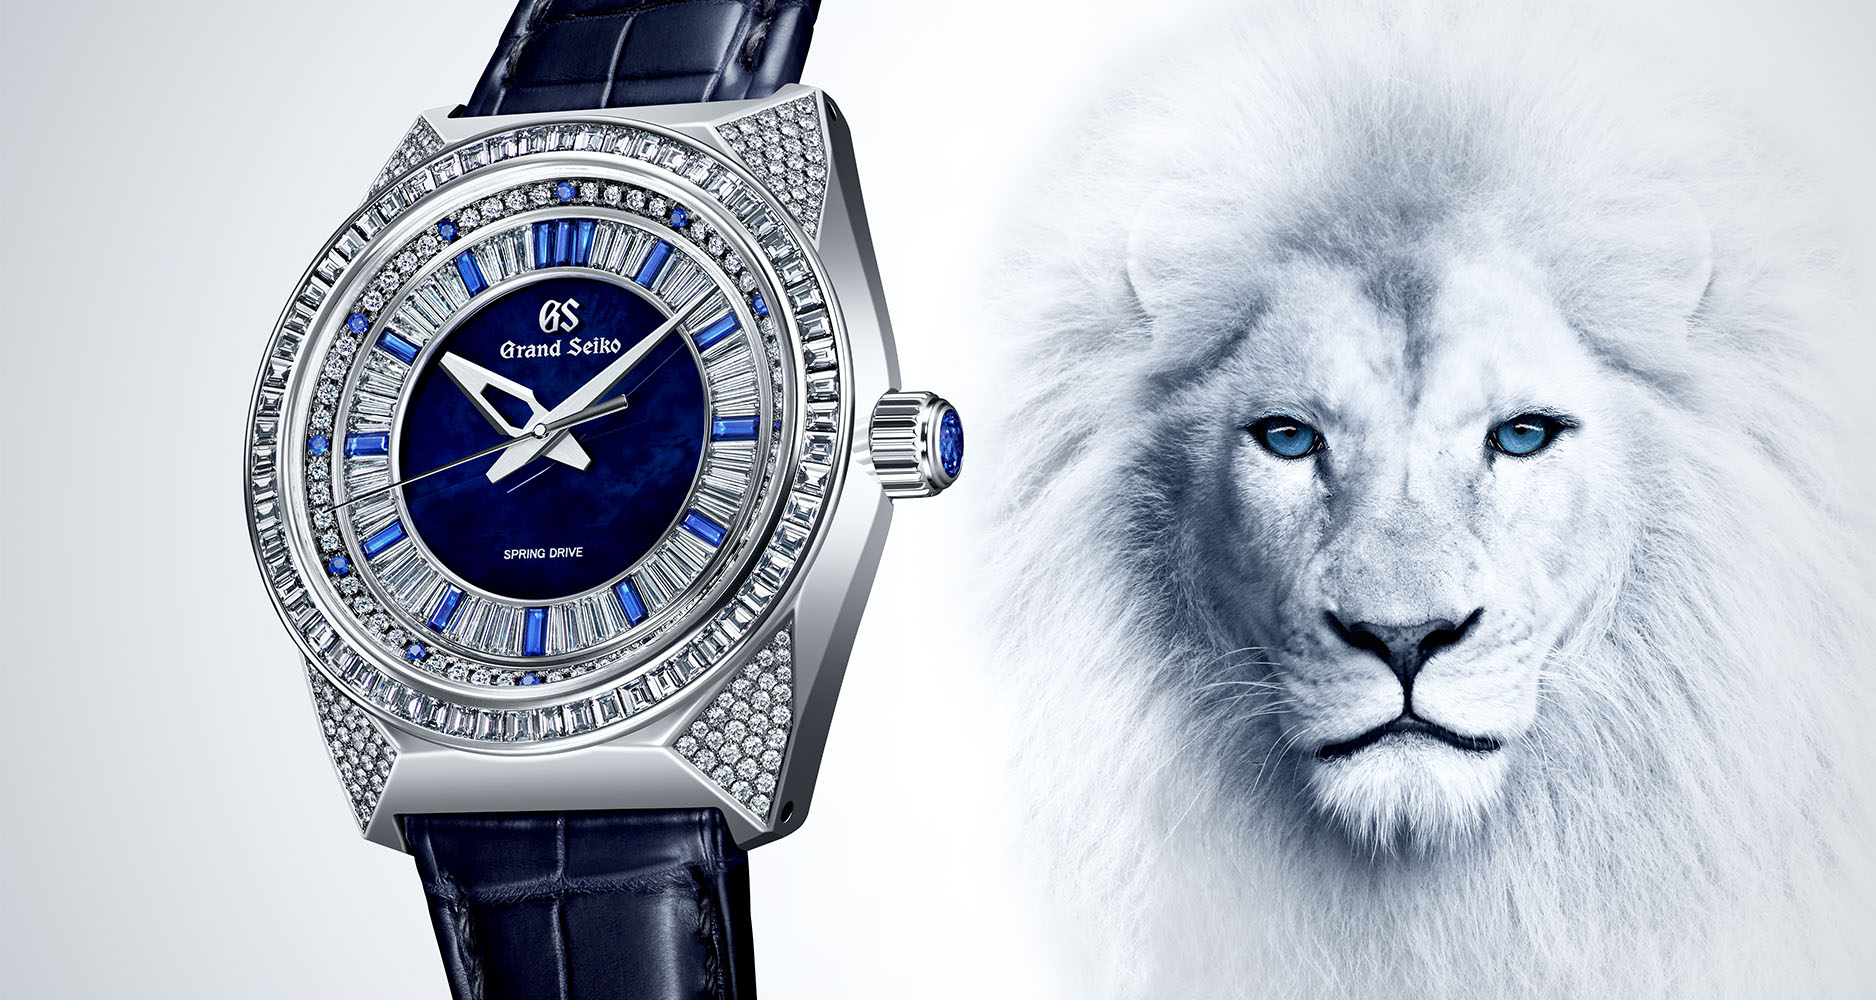 The Grand Seiko Masterpiece Collection Limited Edition SBGD213 is a fully gemset watch inspired by the white lion.